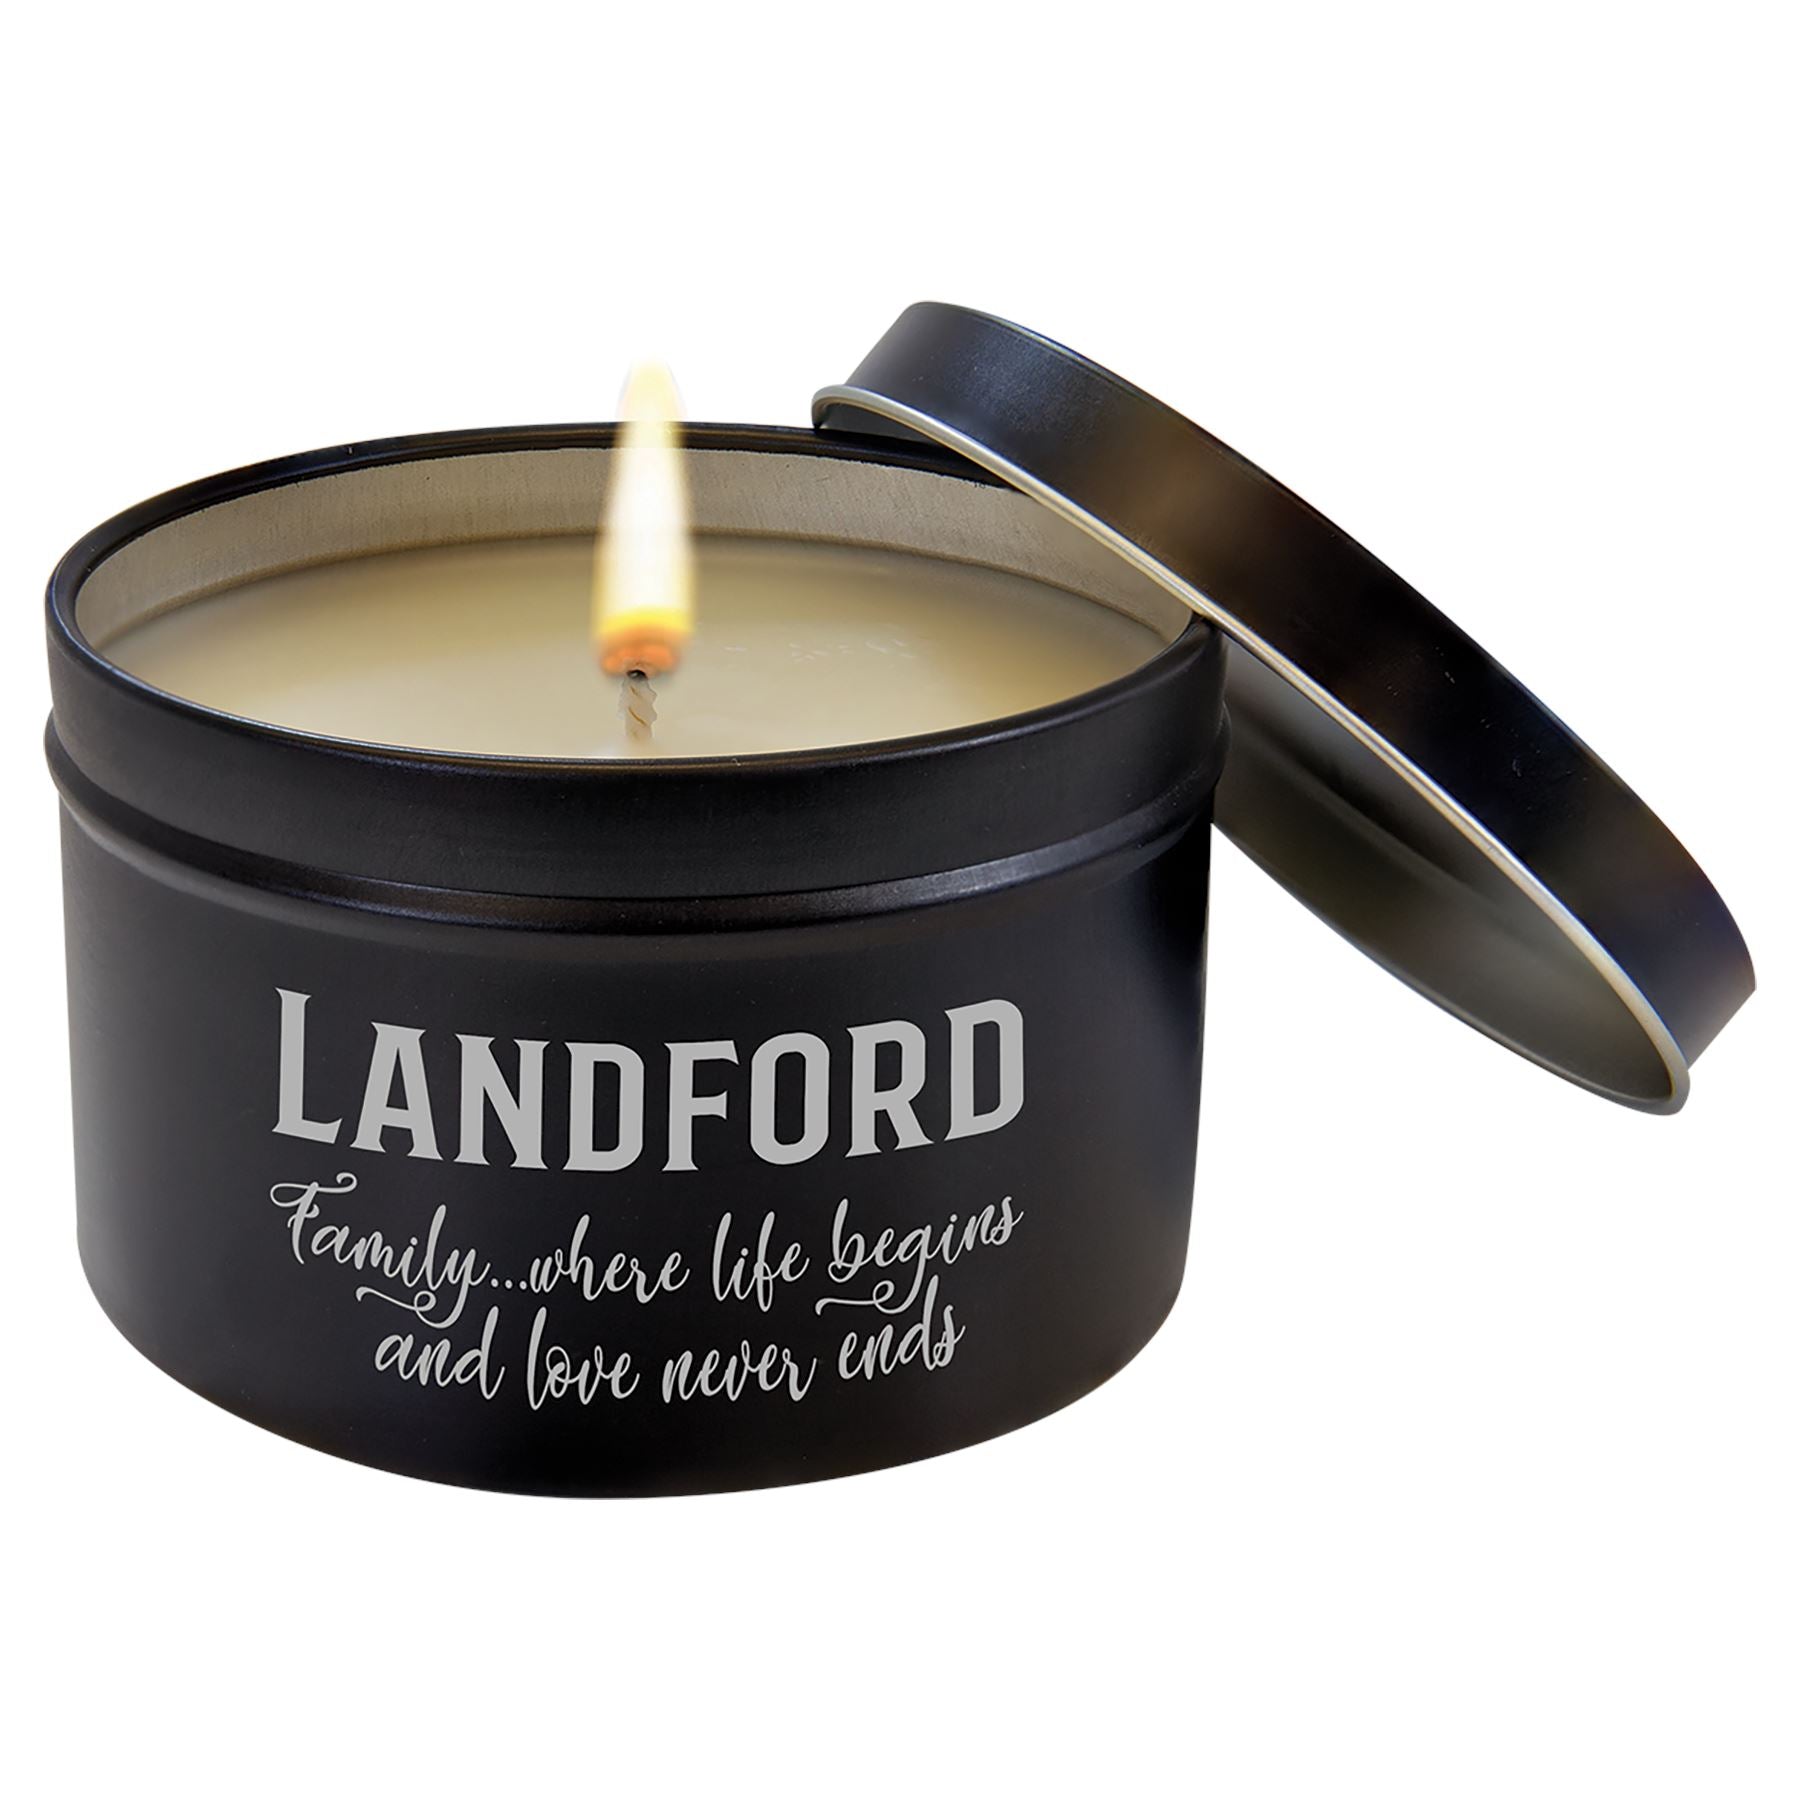 Scented Candle in a Black Metal Tin, 8oz, Laser Engraved